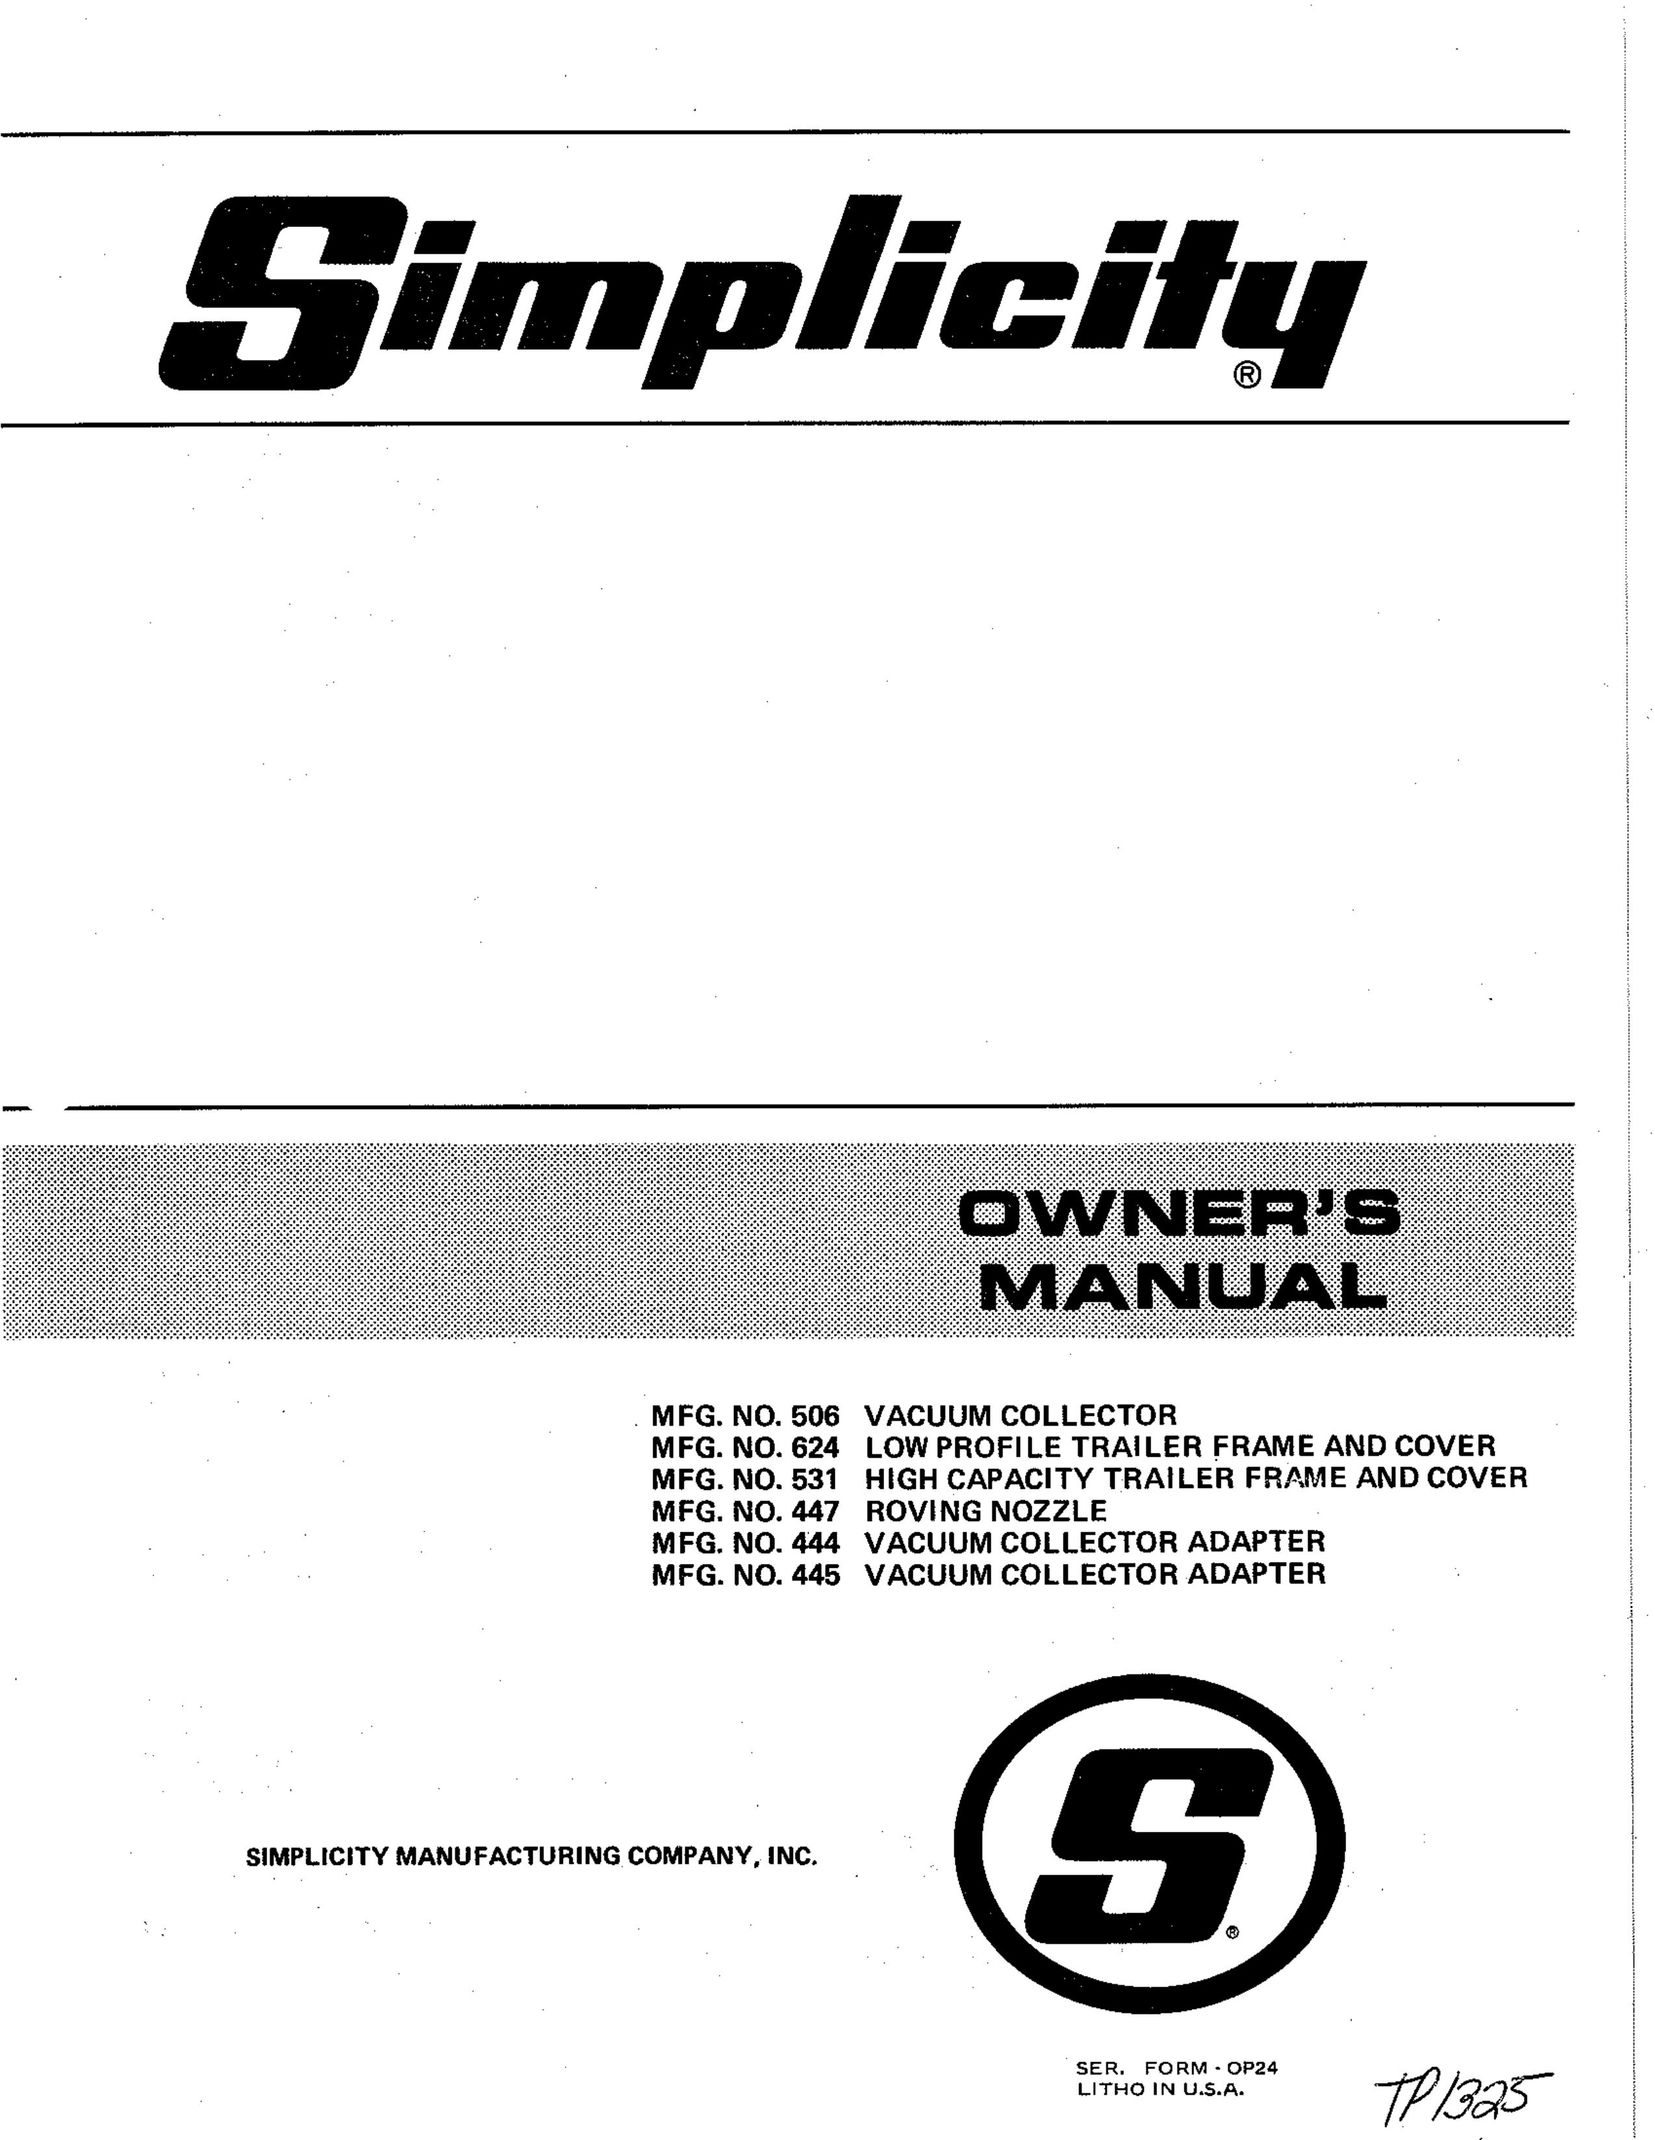 Simplicity TP 100-400 Dust Collector User Manual